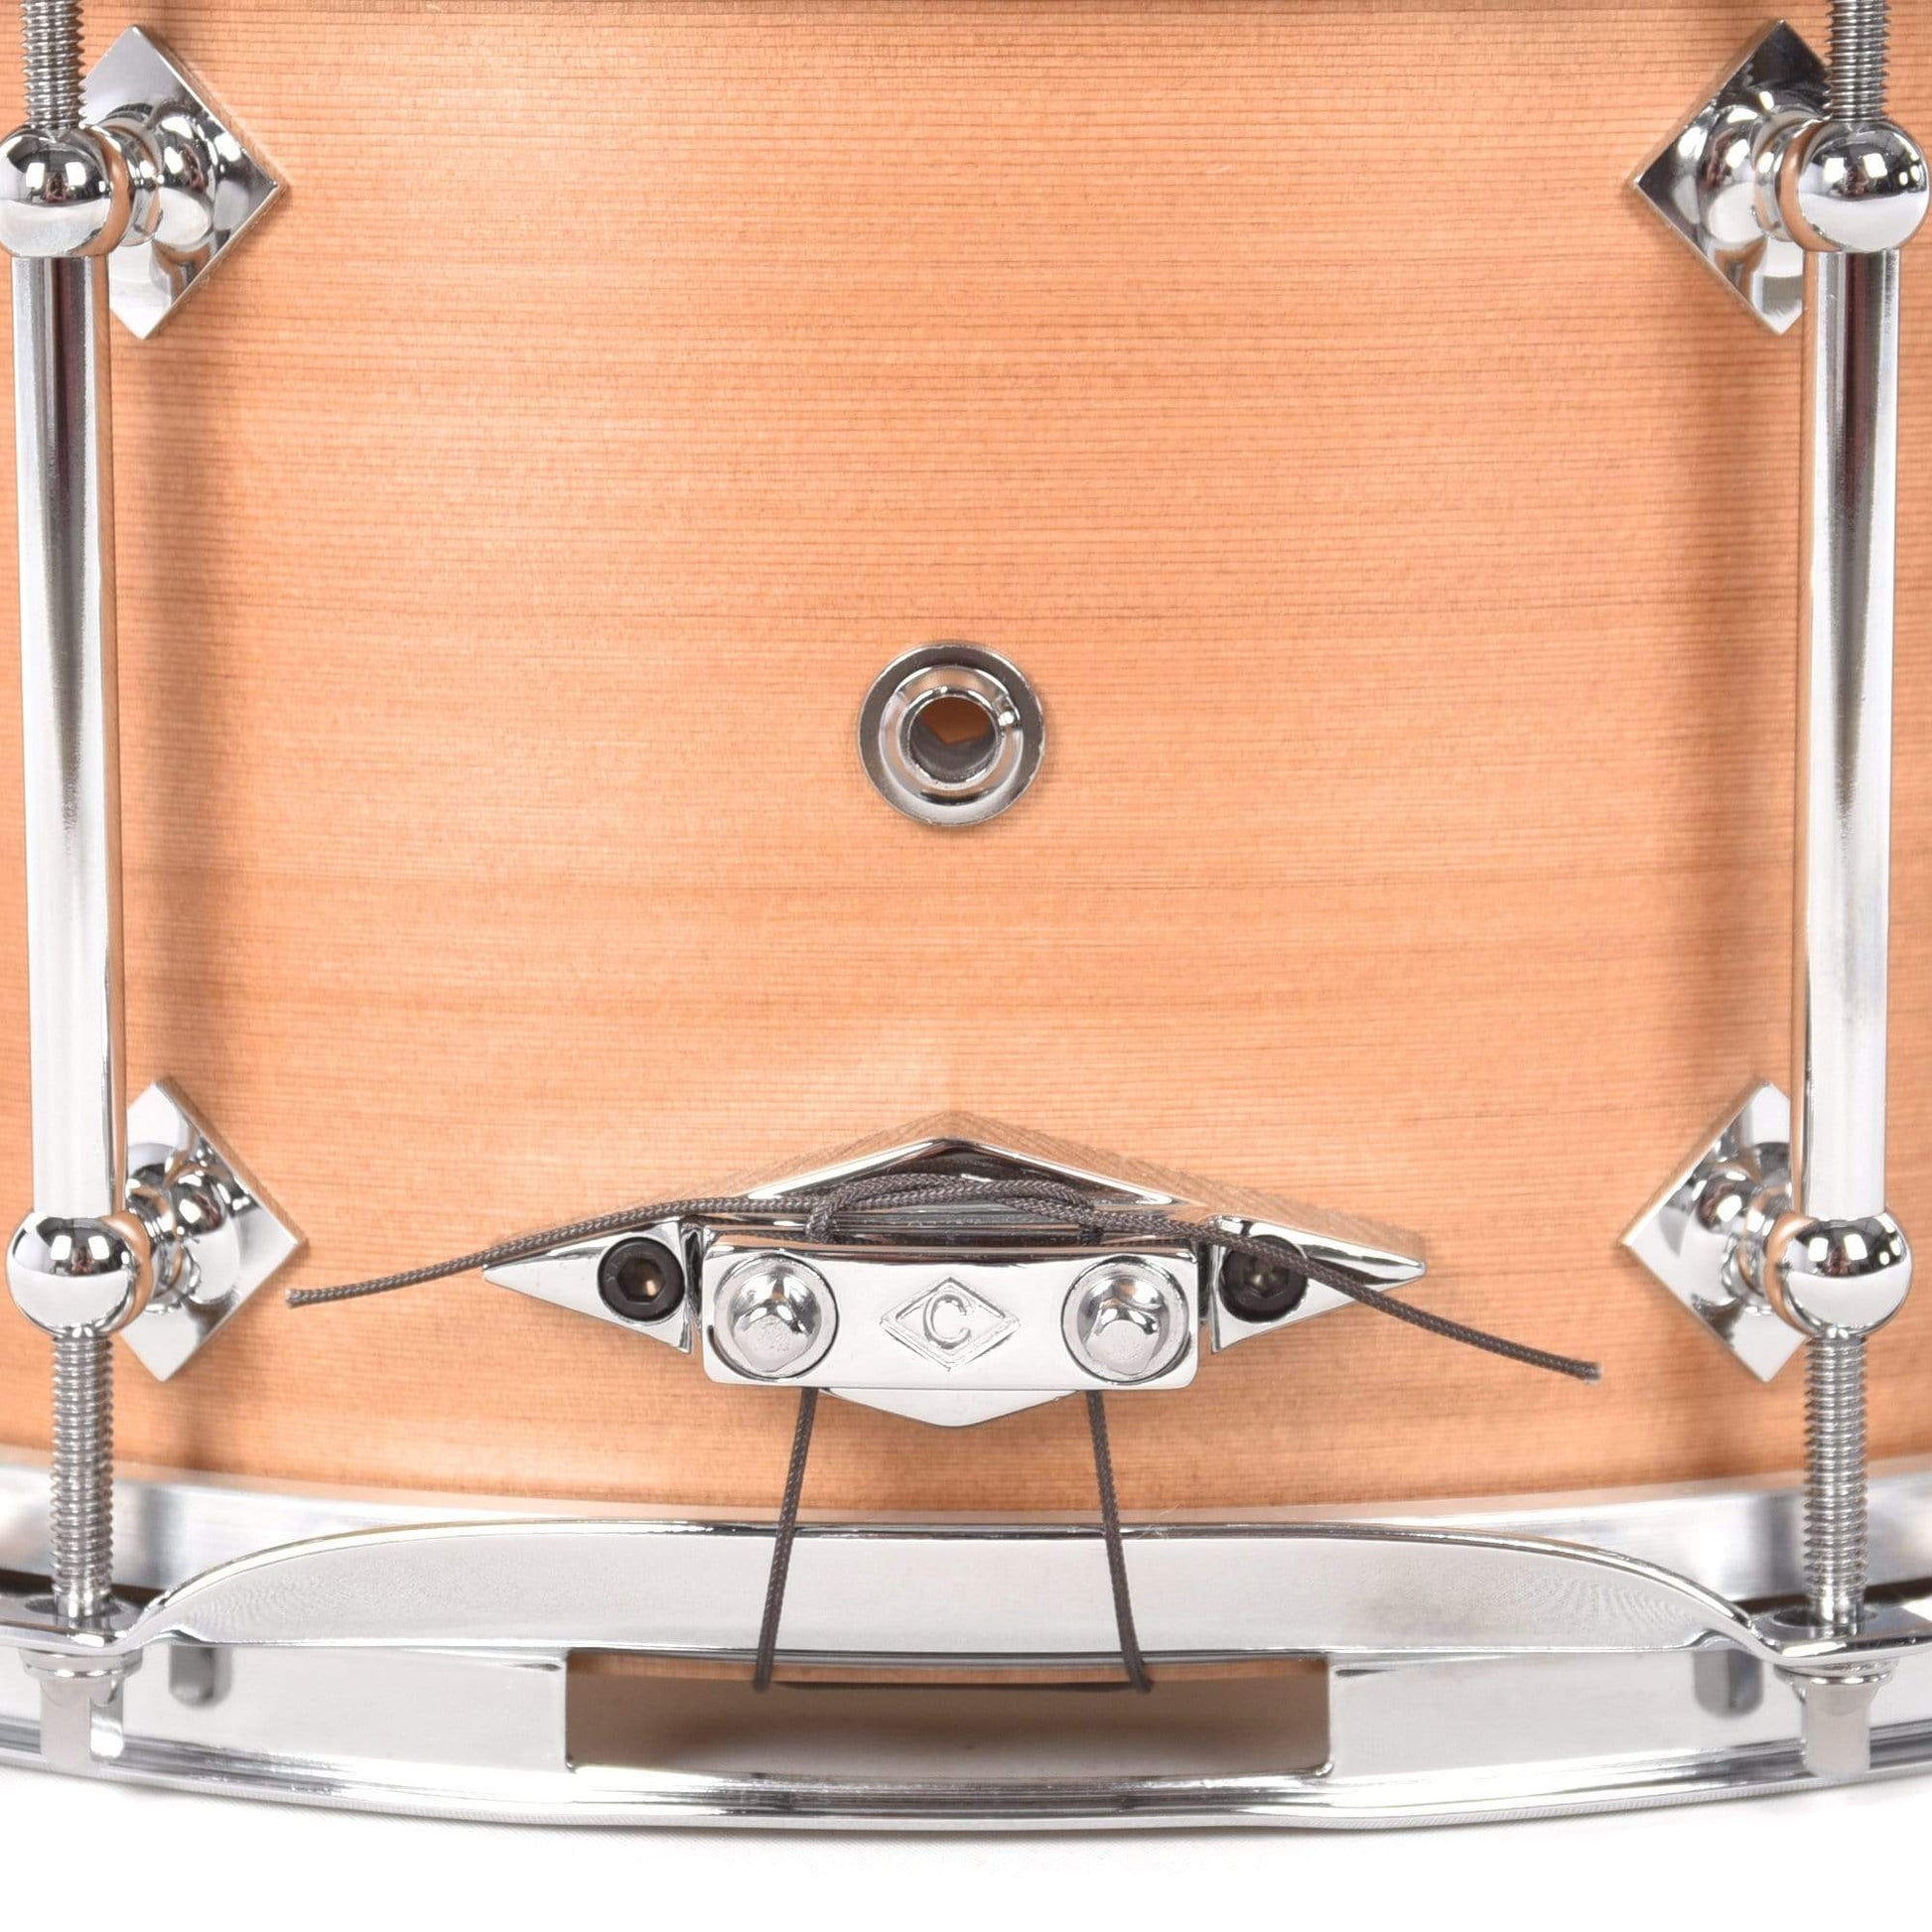 Craviotto 6.5x14 Private Reserve Western Red Cedar Snare Drum Drums and Percussion / Acoustic Drums / Snare